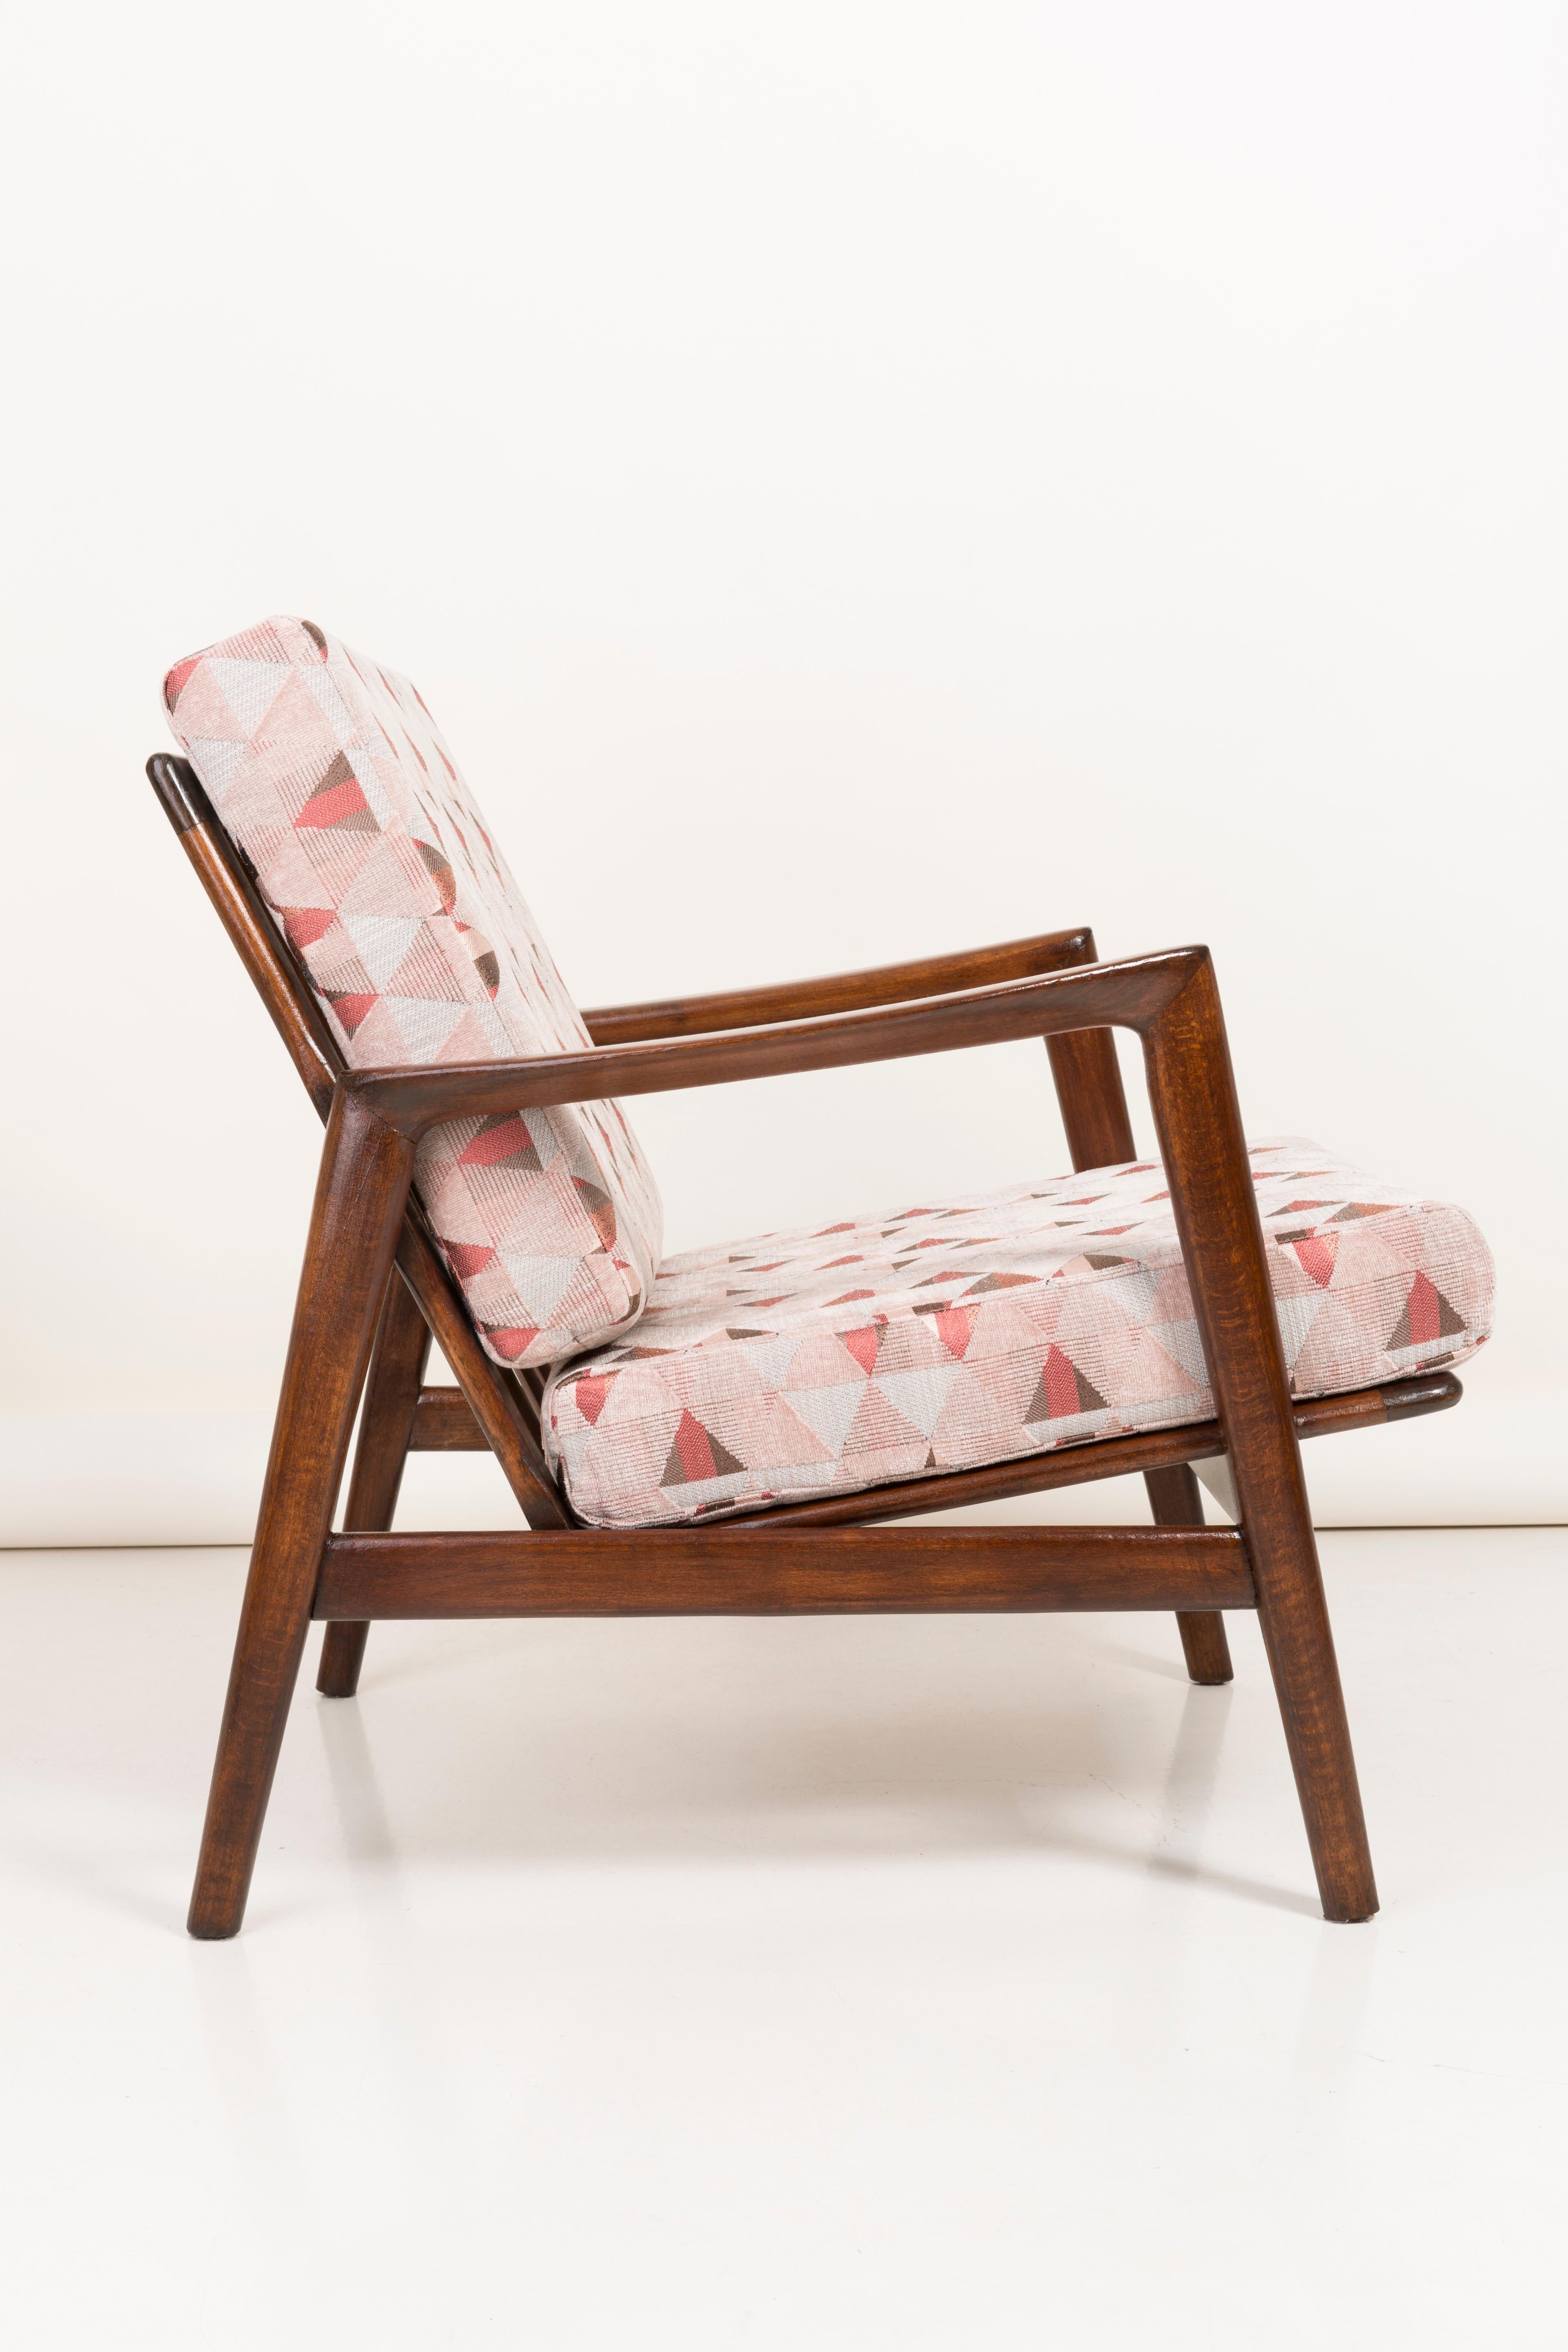 Designed and produced in the 1960s at the Swarzedz Furniture Factory. Armchair style refers to Scandinavian furniture. It was a Polish commodity export.

Furniture after a complete renovation, the wooden frame has been cleaned of the old paint